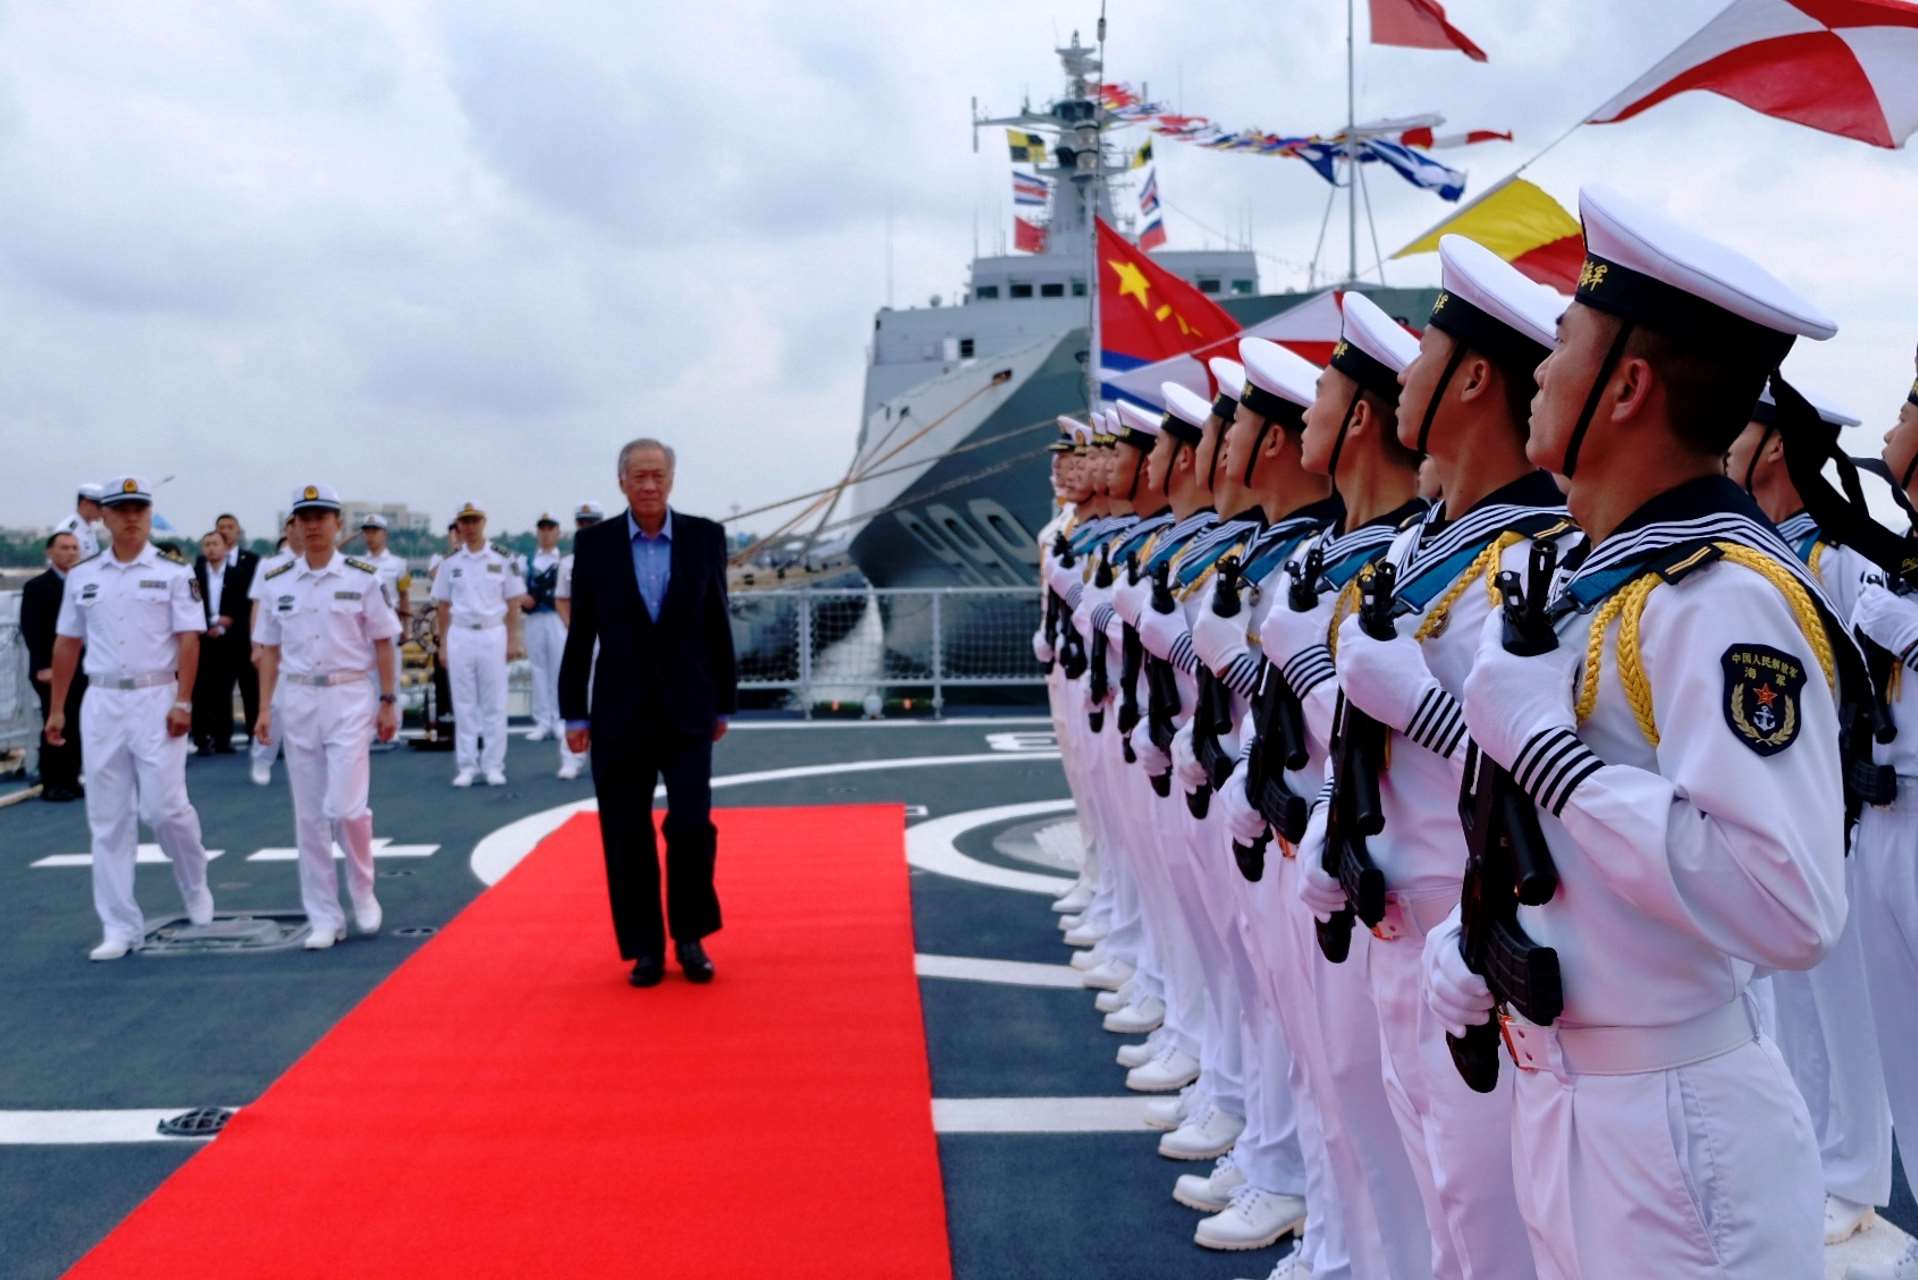 Minister for Defence Dr Ng Eng Hen reviewing an Honor Guard on board the People's Liberation Army Navy (PLAN)'s Type 052D Destroyer Changsha during his visit to the ASEAN-China Maritime Exercise in Zhanjiang today.